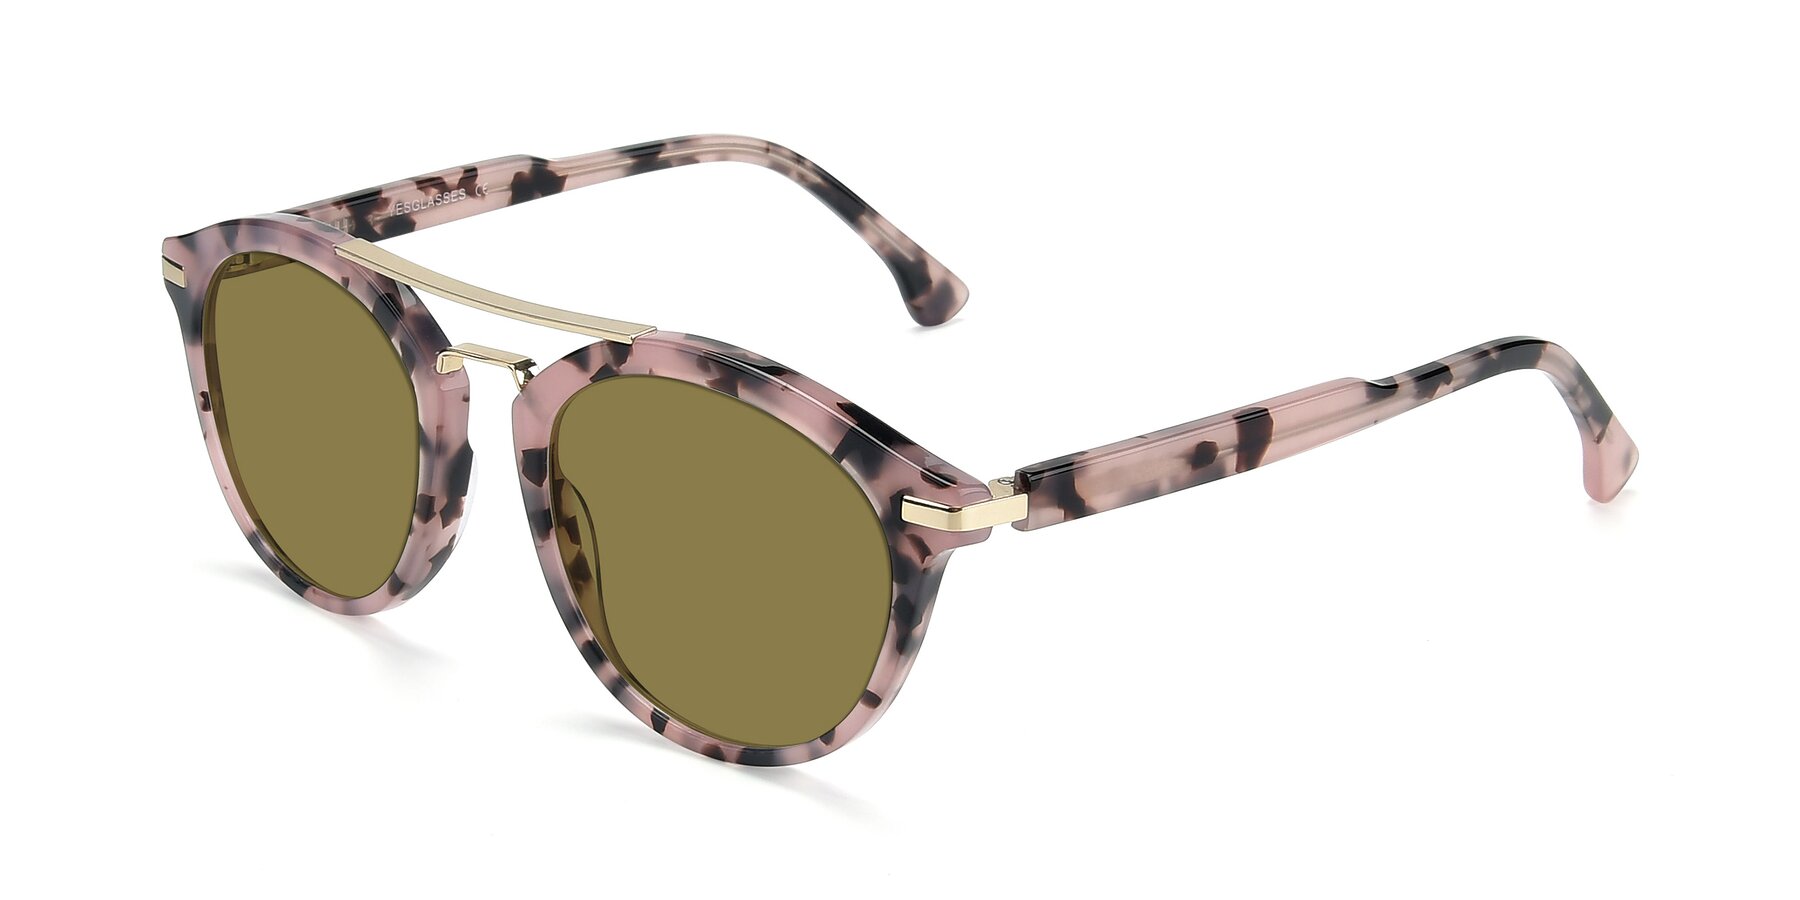 Angle of 17236 in Havana Floral-Gold with Brown Polarized Lenses